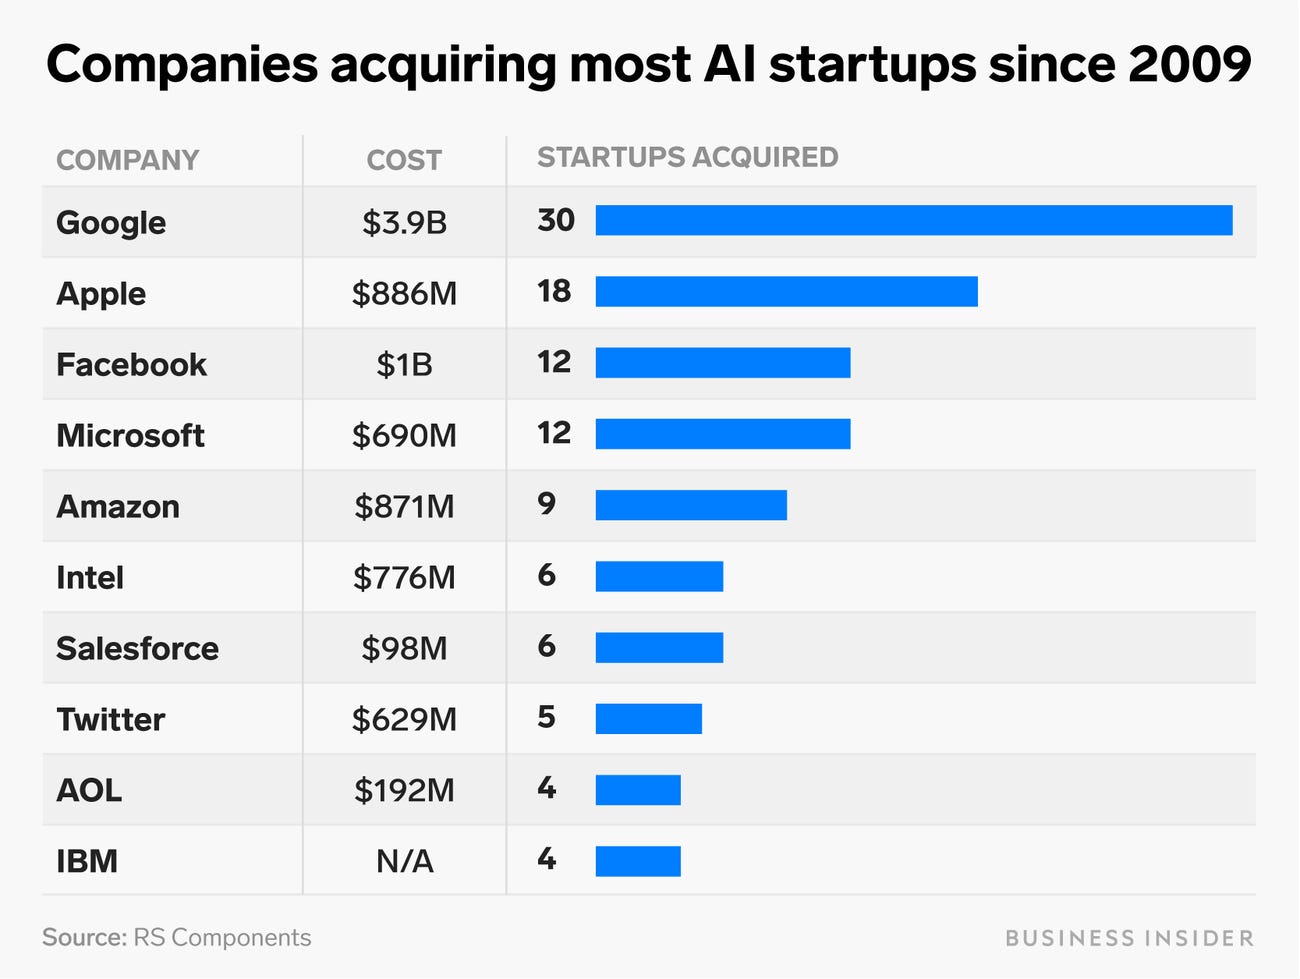 The AI startup industry may be heading for consolidation and bigger